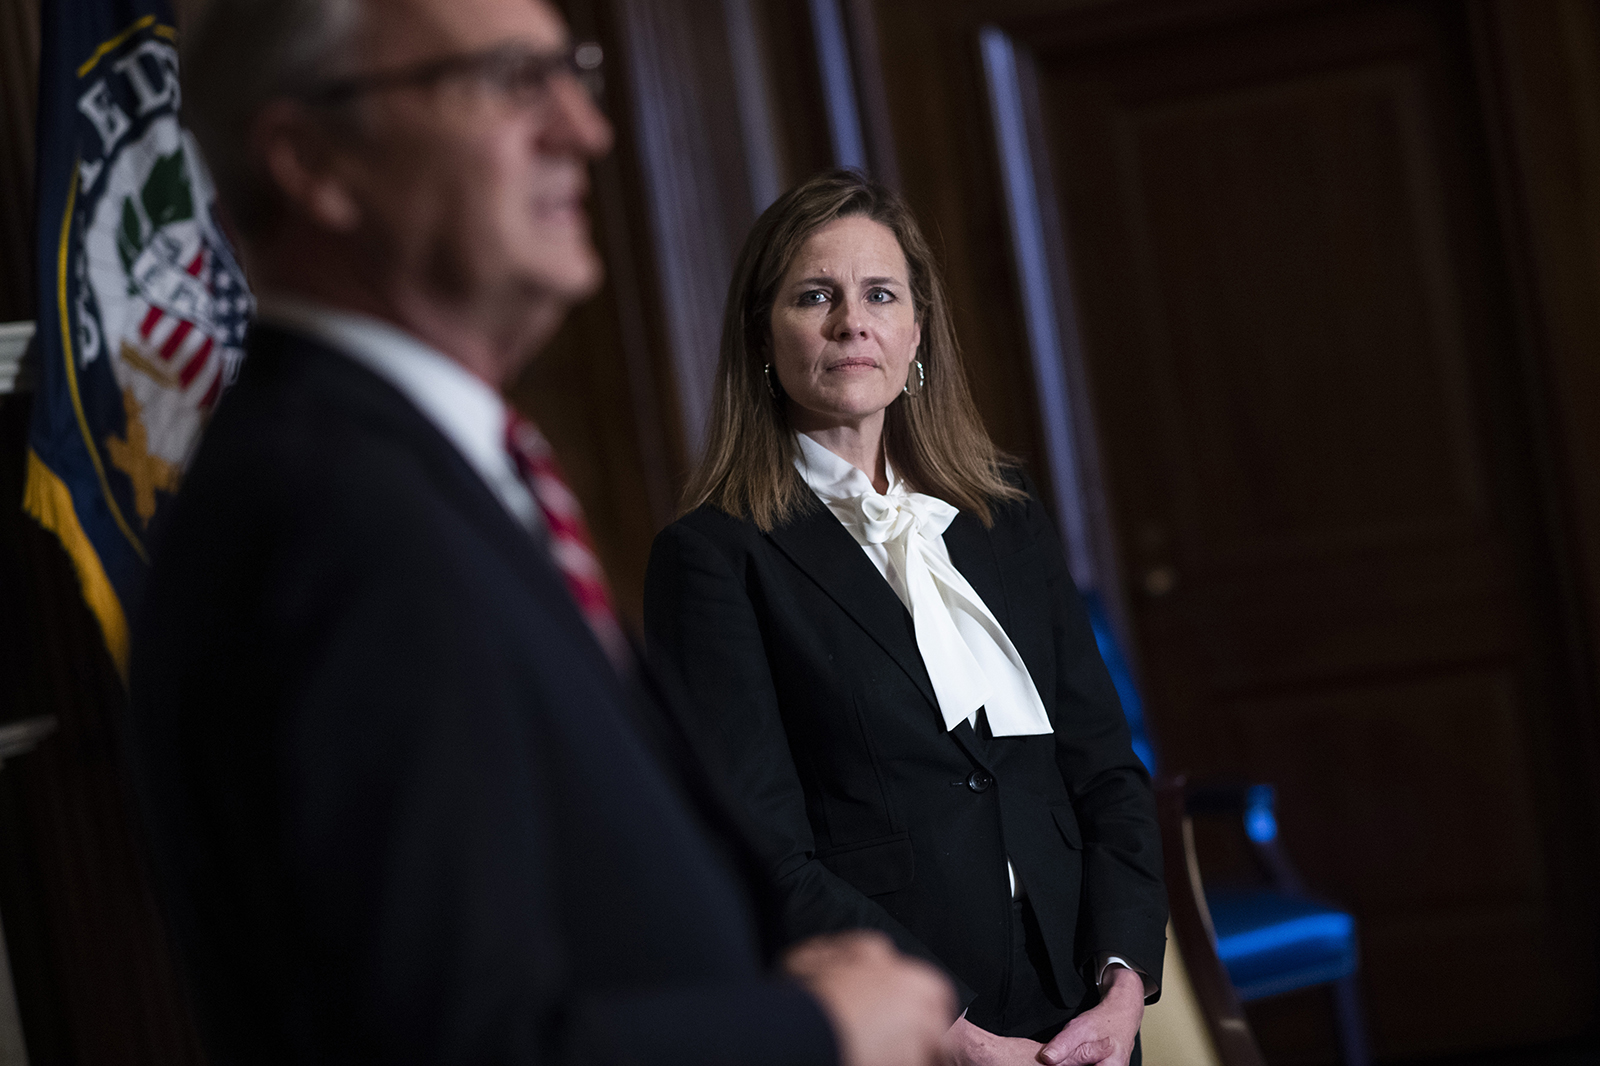 Seventh U.S. Circuit Court Judge Amy Coney Barrett, President Trump's pick for the Supreme Court, meets with Sen. Kevin Cramer in the Mansfield Room of the U.S. Capitol on October 1 in Washington. 